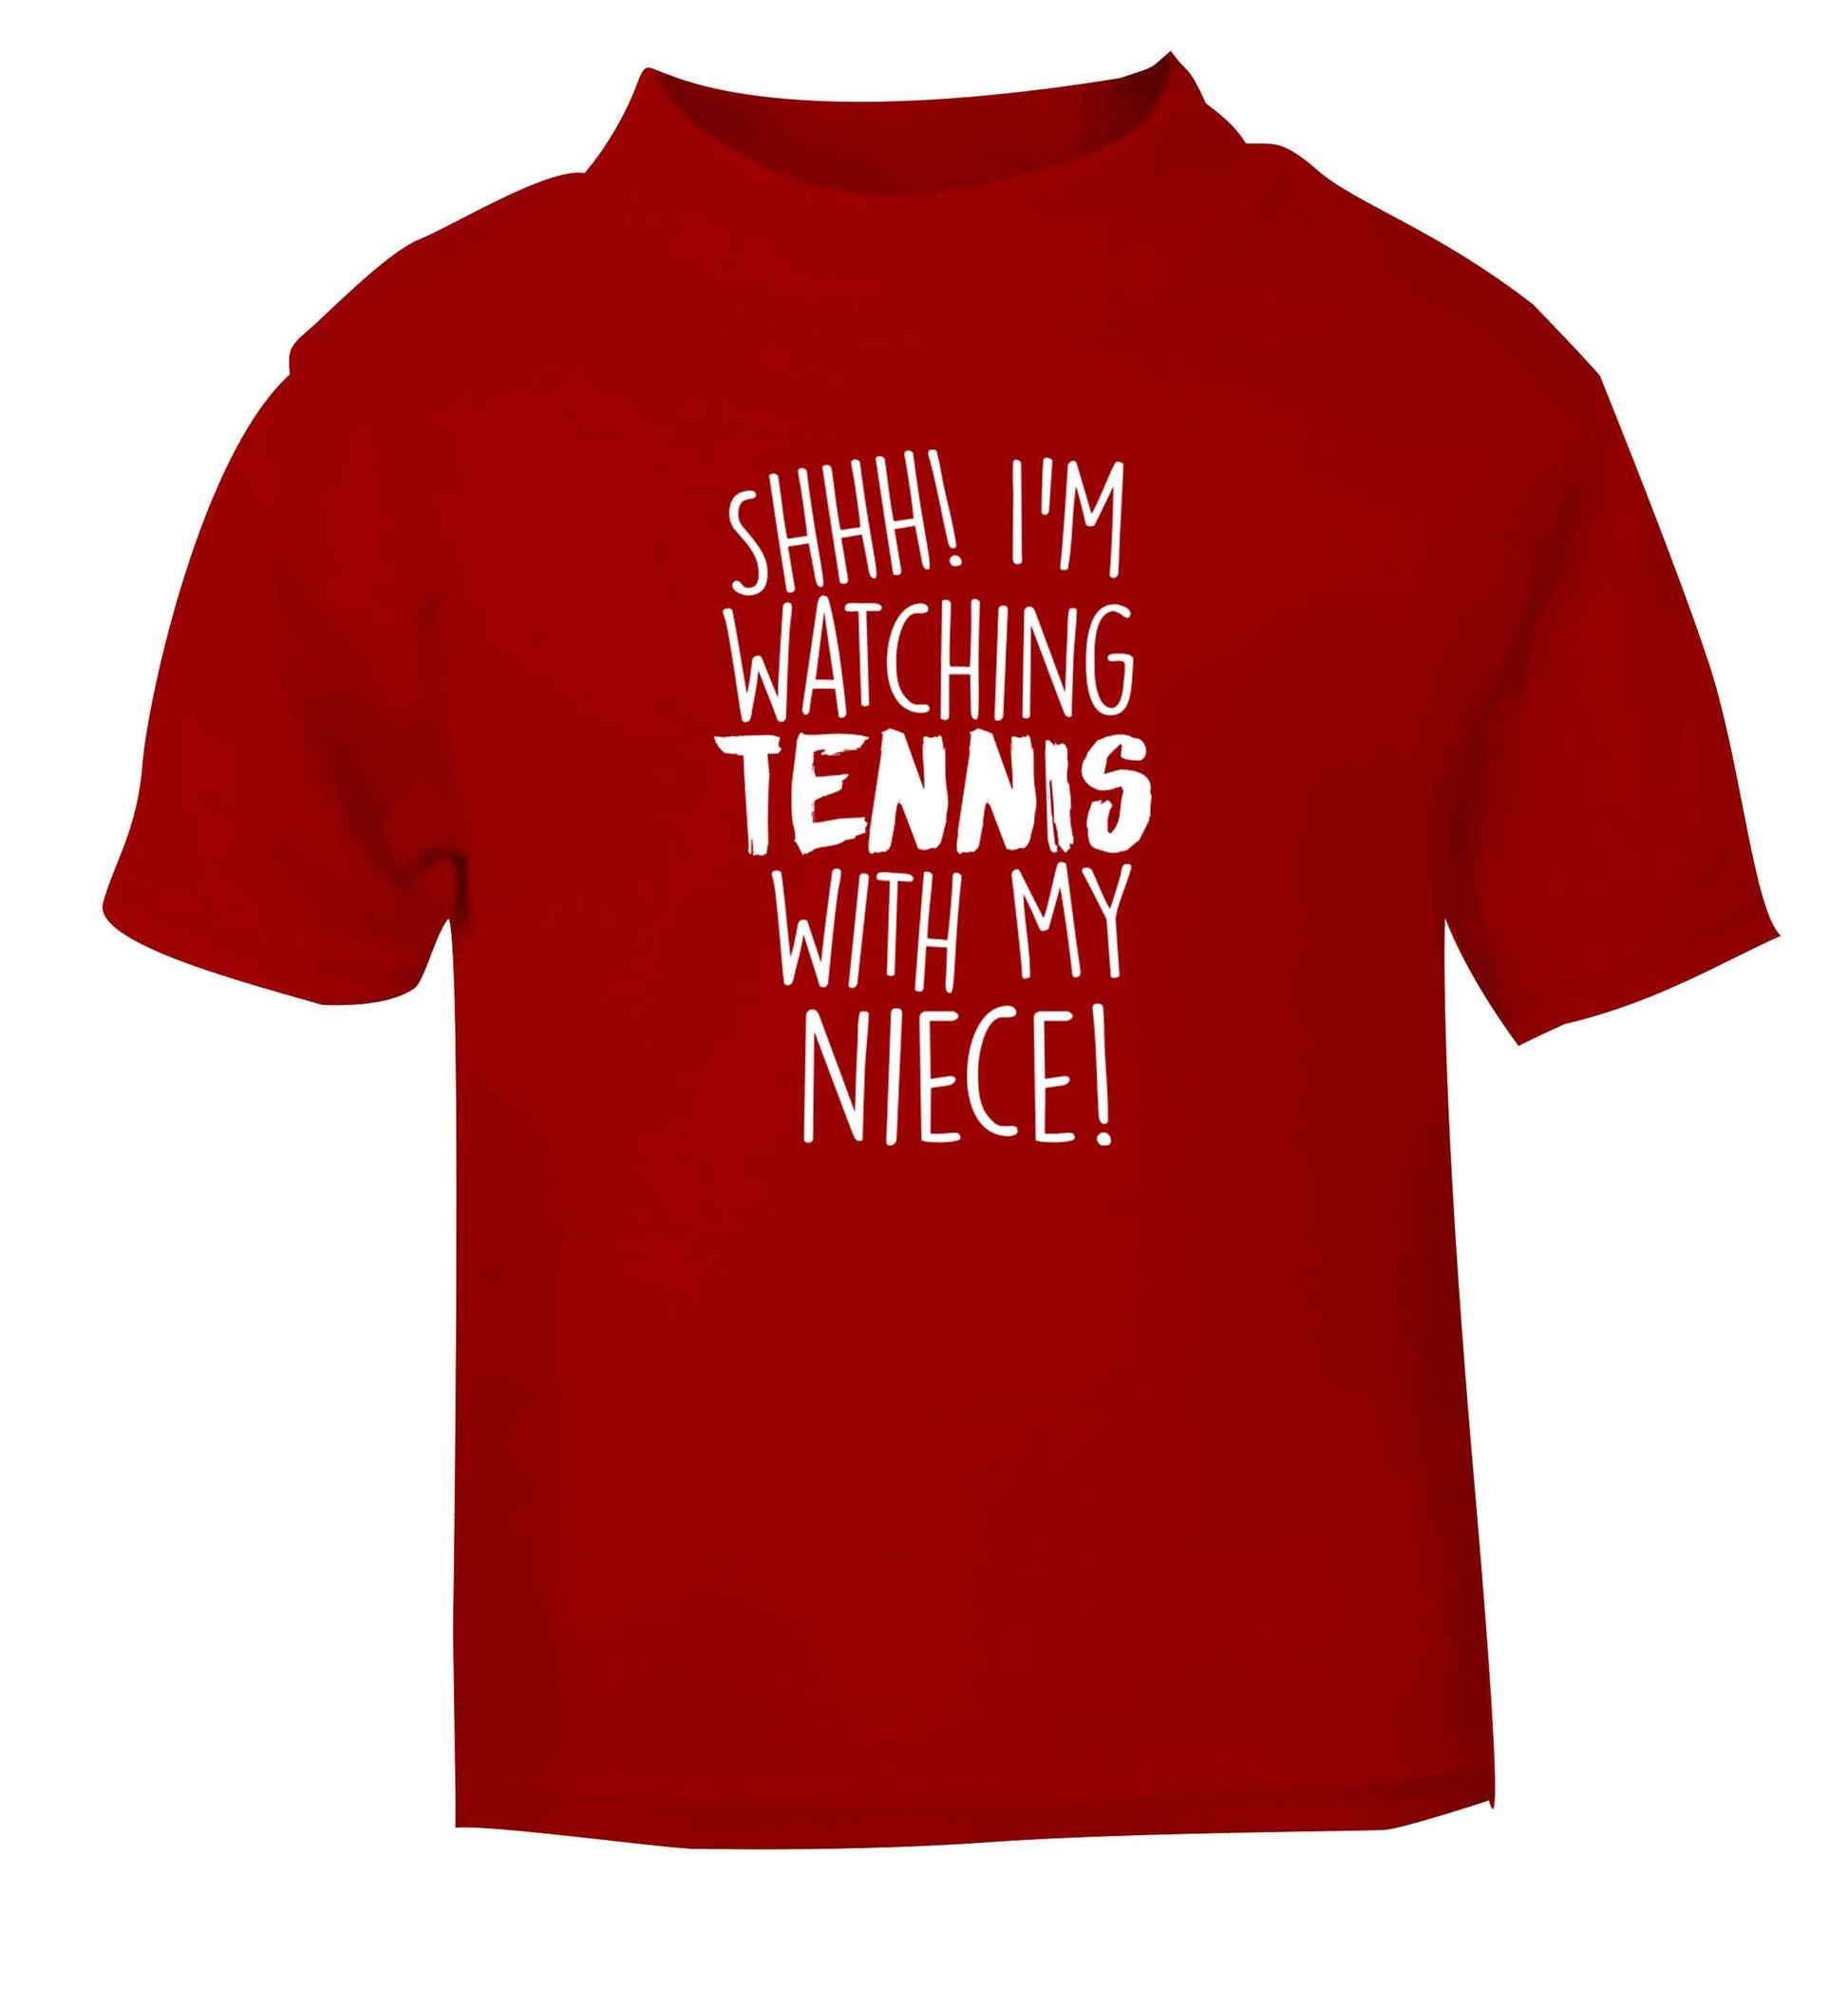 Shh! I'm watching tennis with my niece! red Baby Toddler Tshirt 2 Years